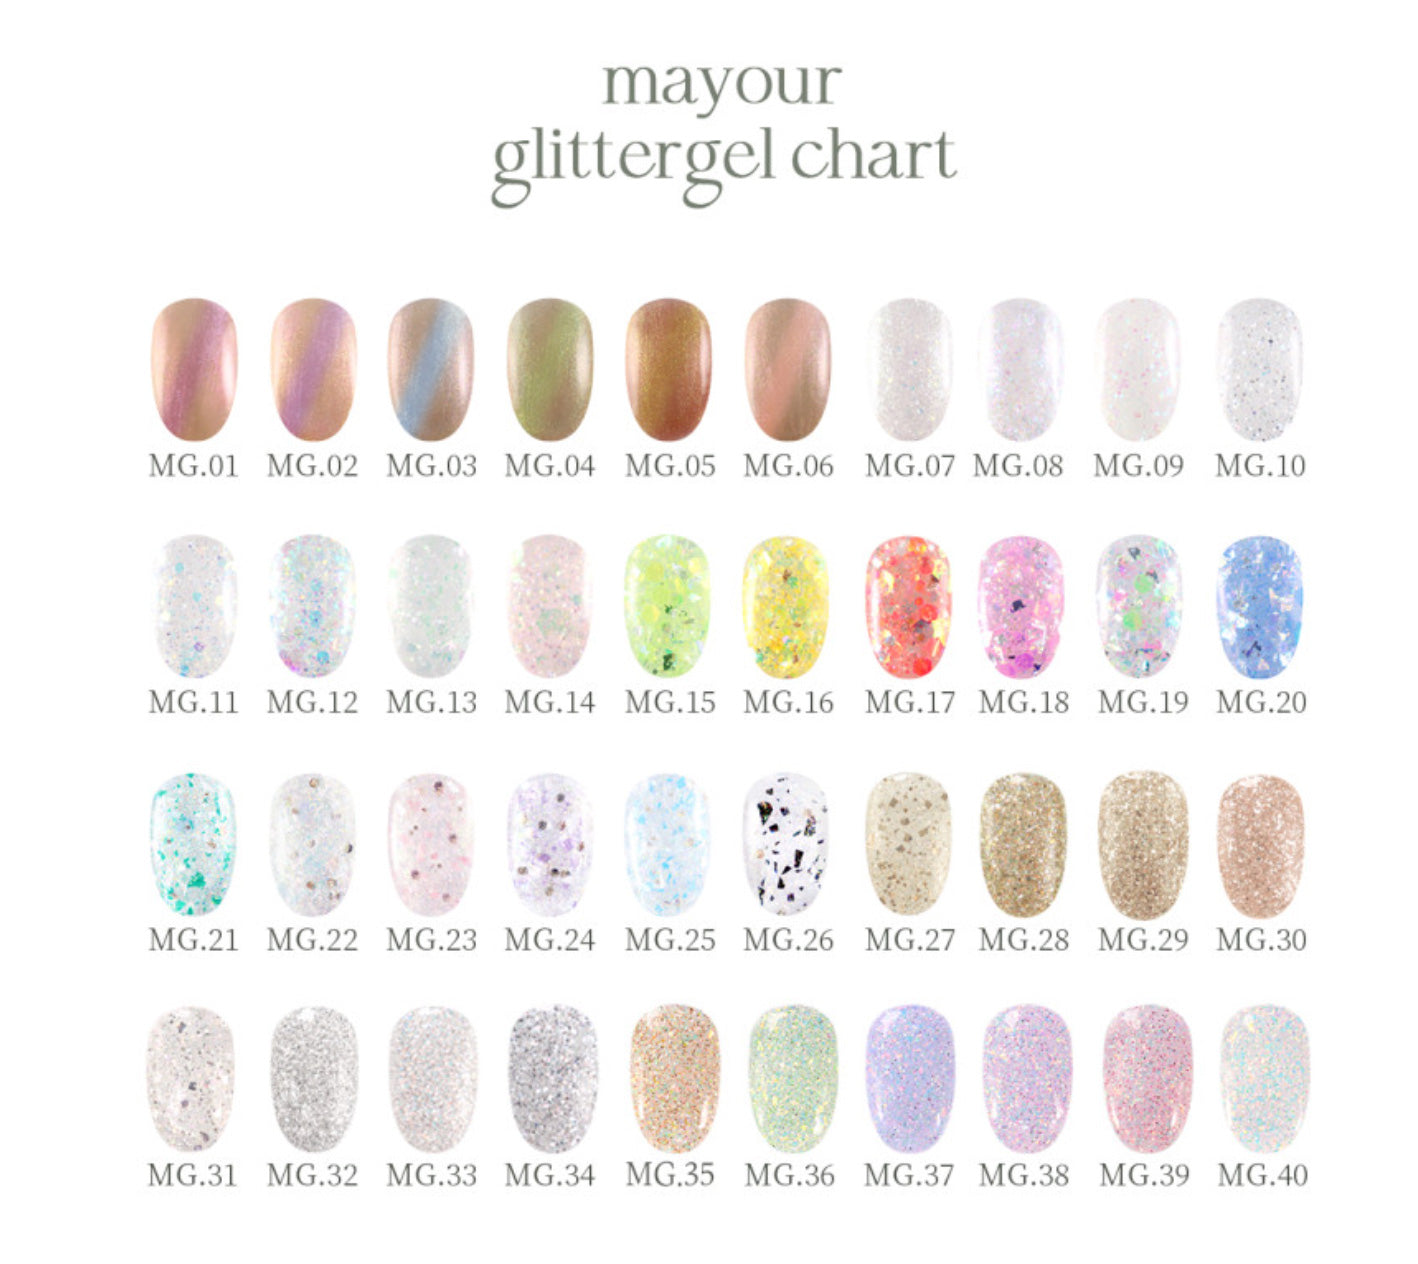 mayour 40 glitter set color chart